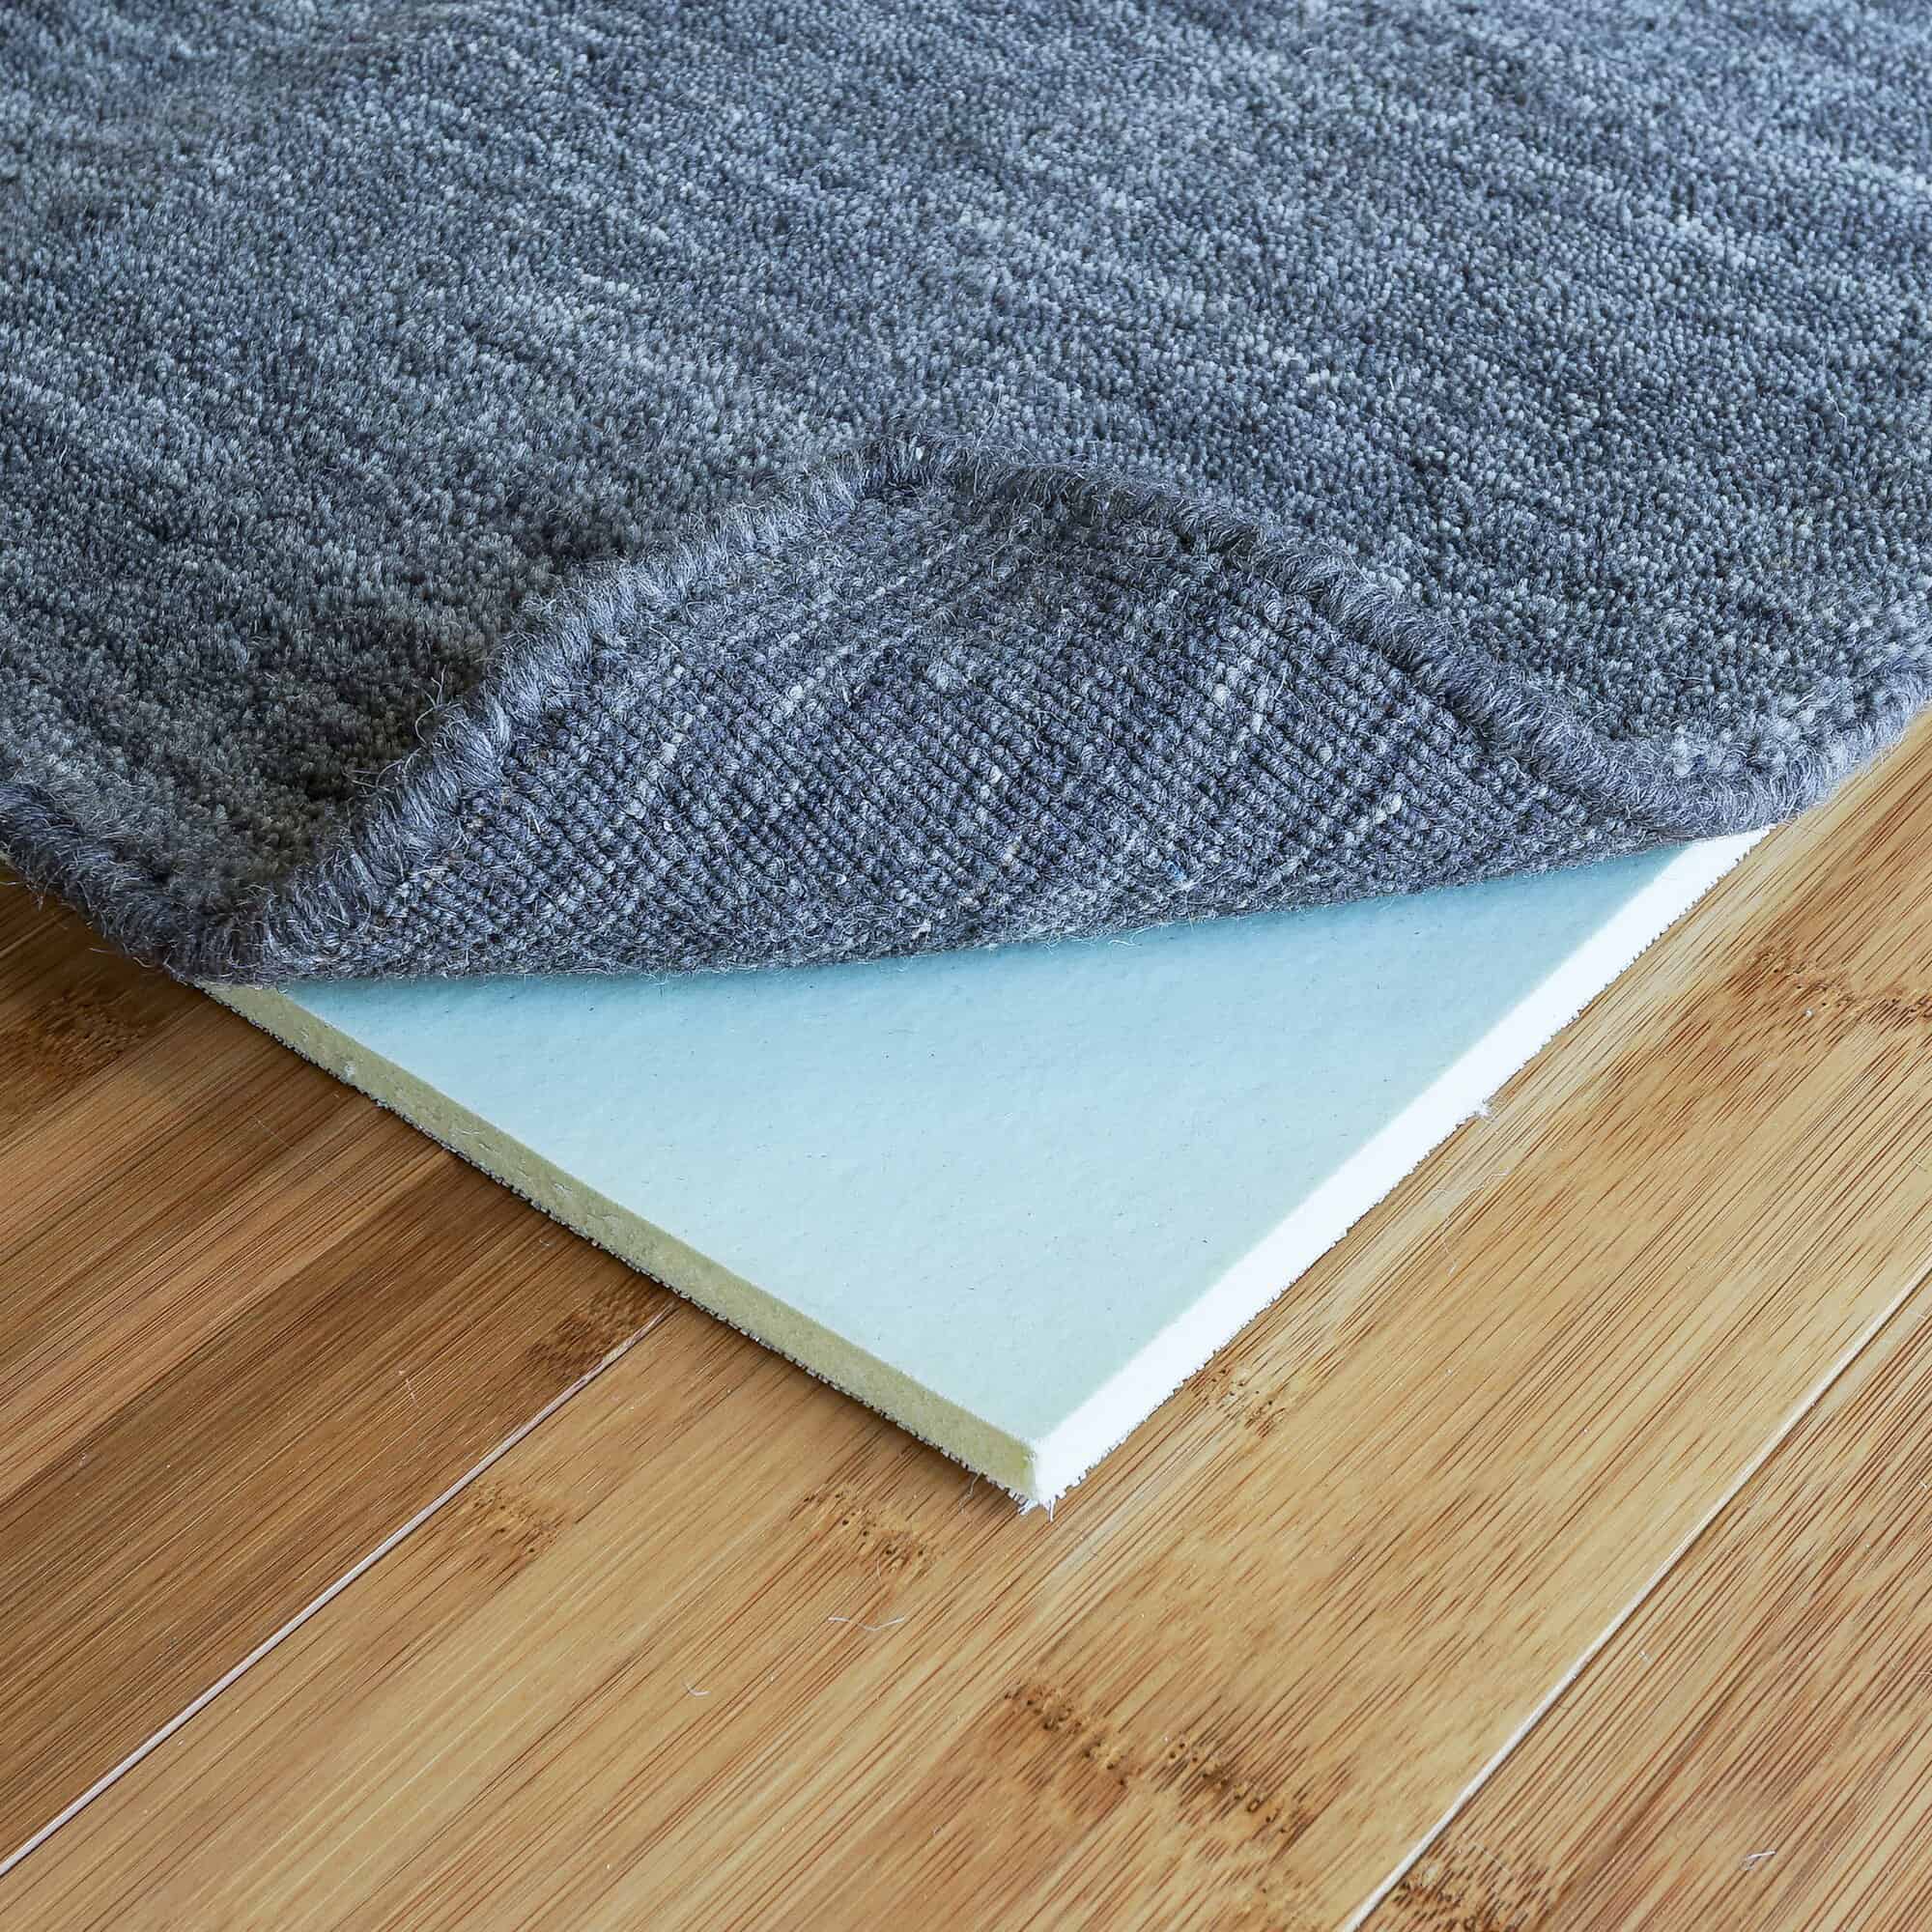 Comfort Comes First With Cloud Comfort Rugs